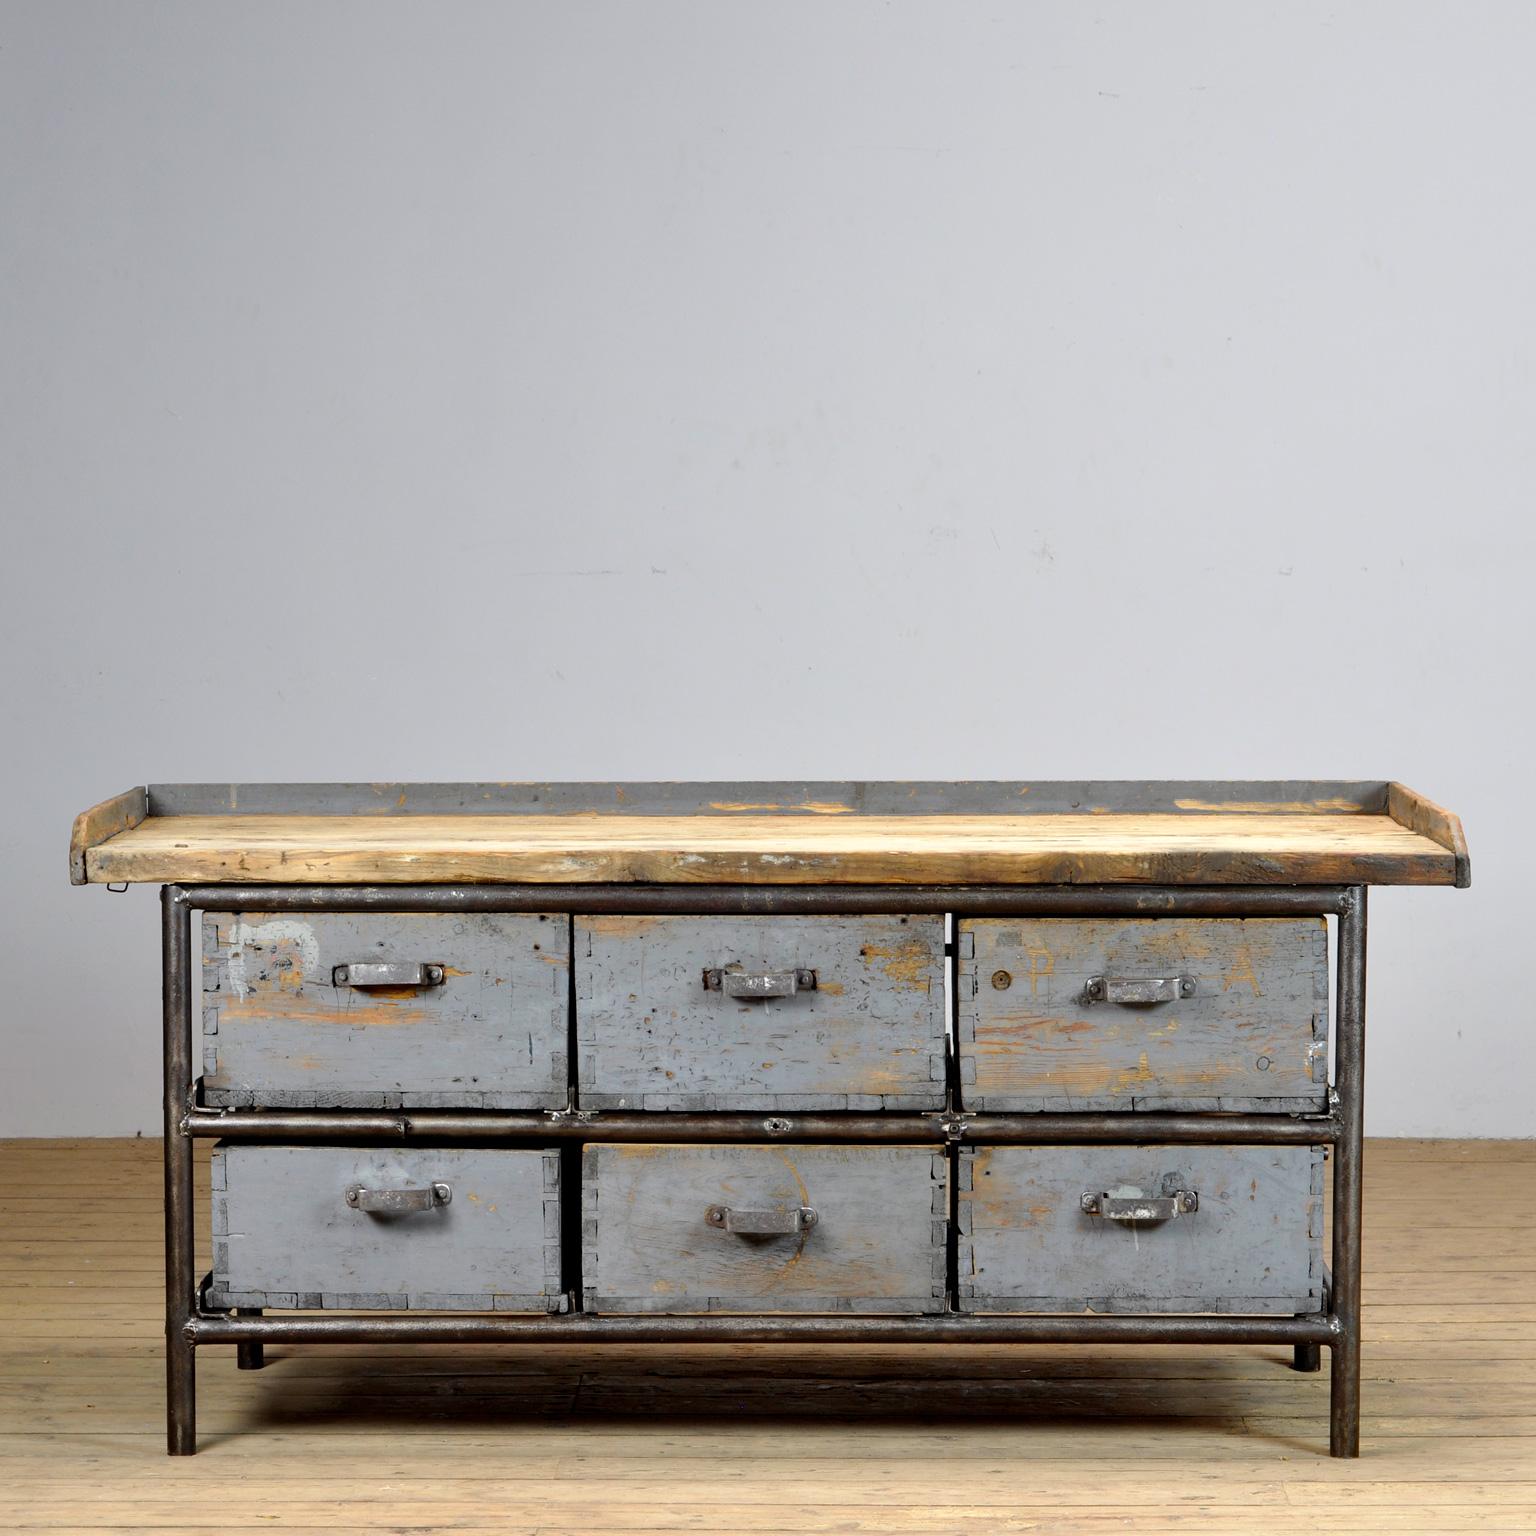 Nice large industrial workbench. The workbench is made of iron with 6 drawers of wood. In the 6 drawers, made of solid pine with dovetail connections, a wealth of storage space. Can be used, for example, as a sideboard or as a kitchen island or